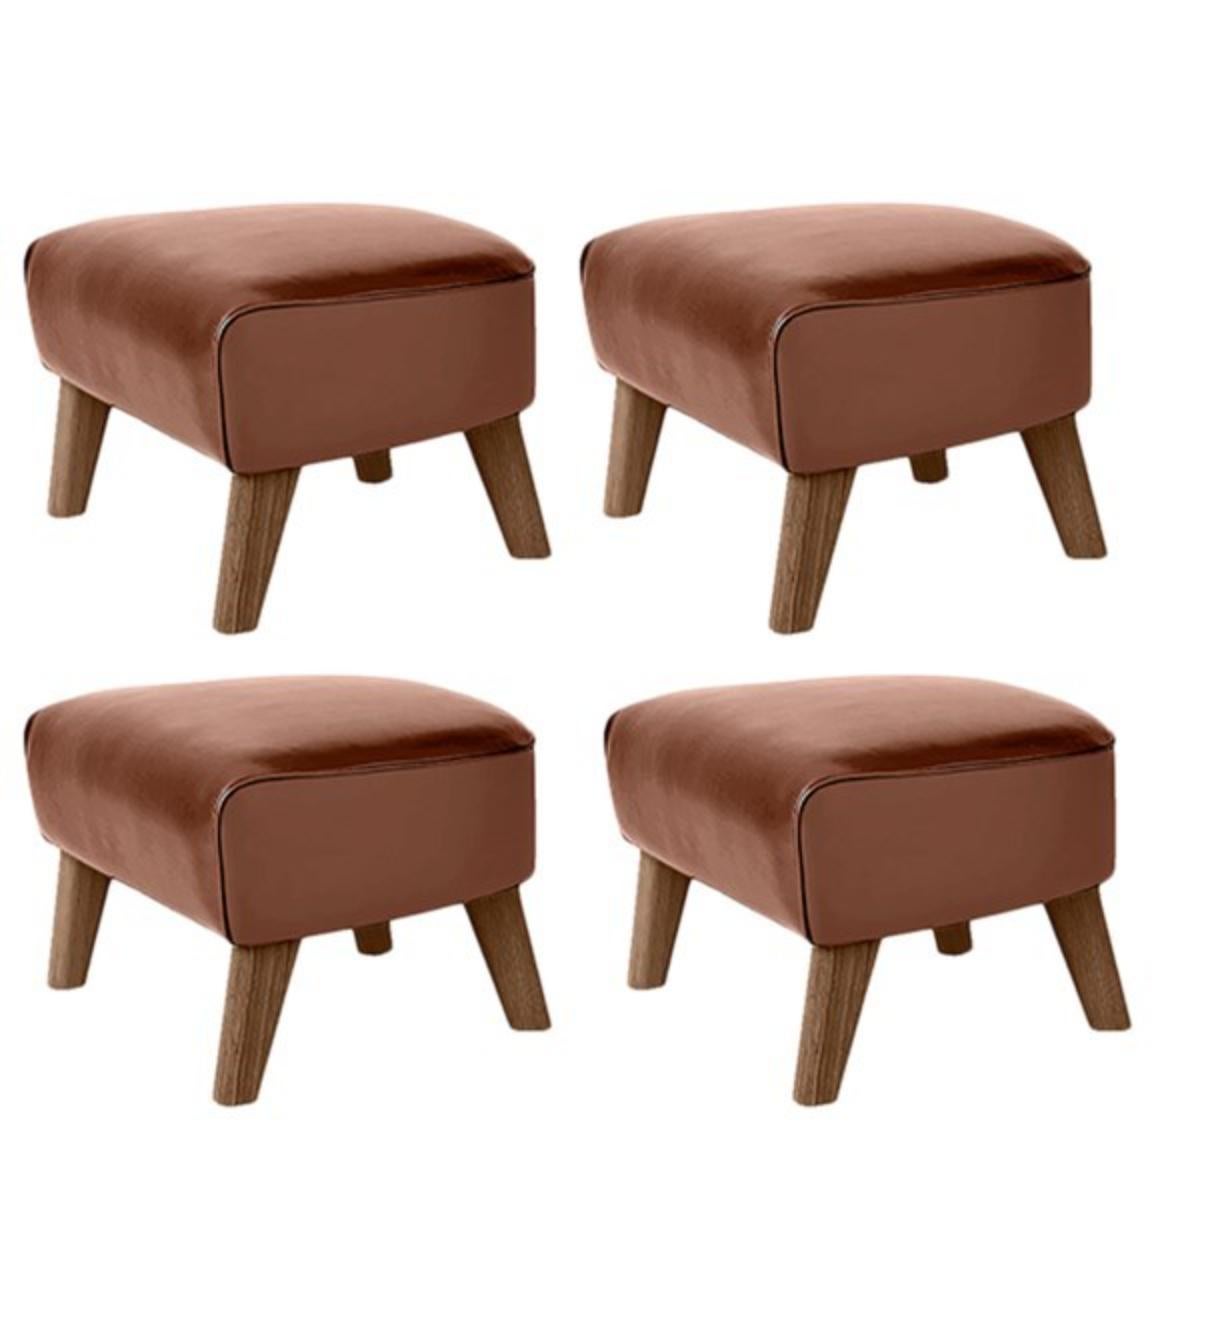 Set of 4 brown leather and smoked Oak My Own Chair footstools by Lassen
Dimensions: w 56 x d 58 x h 40 cm 
Materials: Leather

The My Own Chair footstool has been designed in the same spirit as Flemming Lassen’s original iconic chair, reflecting